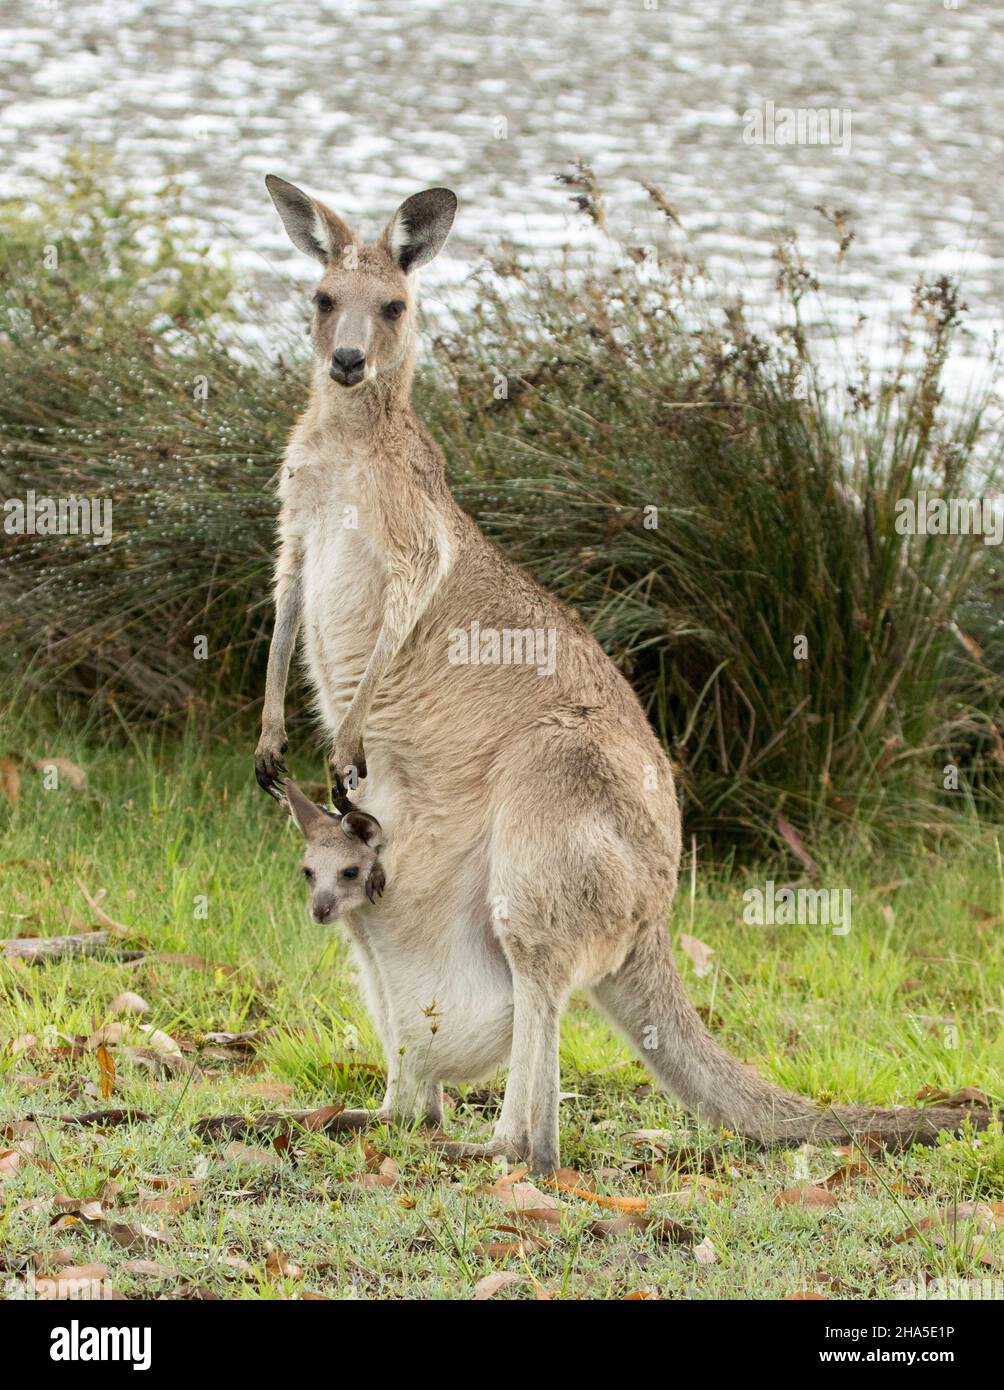 Eastern Grey Kangaroo with tiny joey peering from her pouch, both staring at the camera, in the wild beside water of beach in Australia. Stock Photo